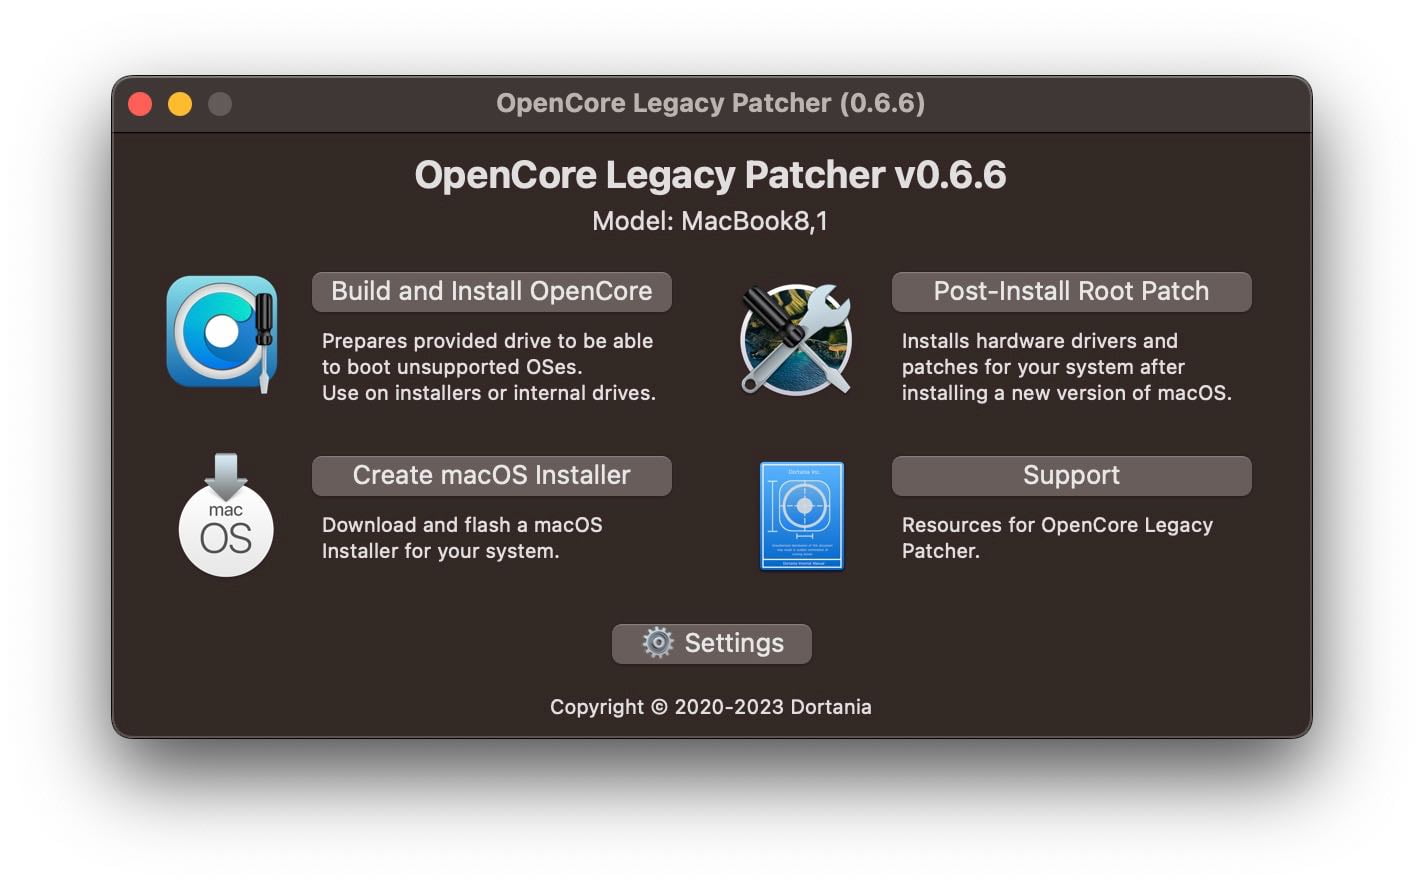 opencore legacy patcher options